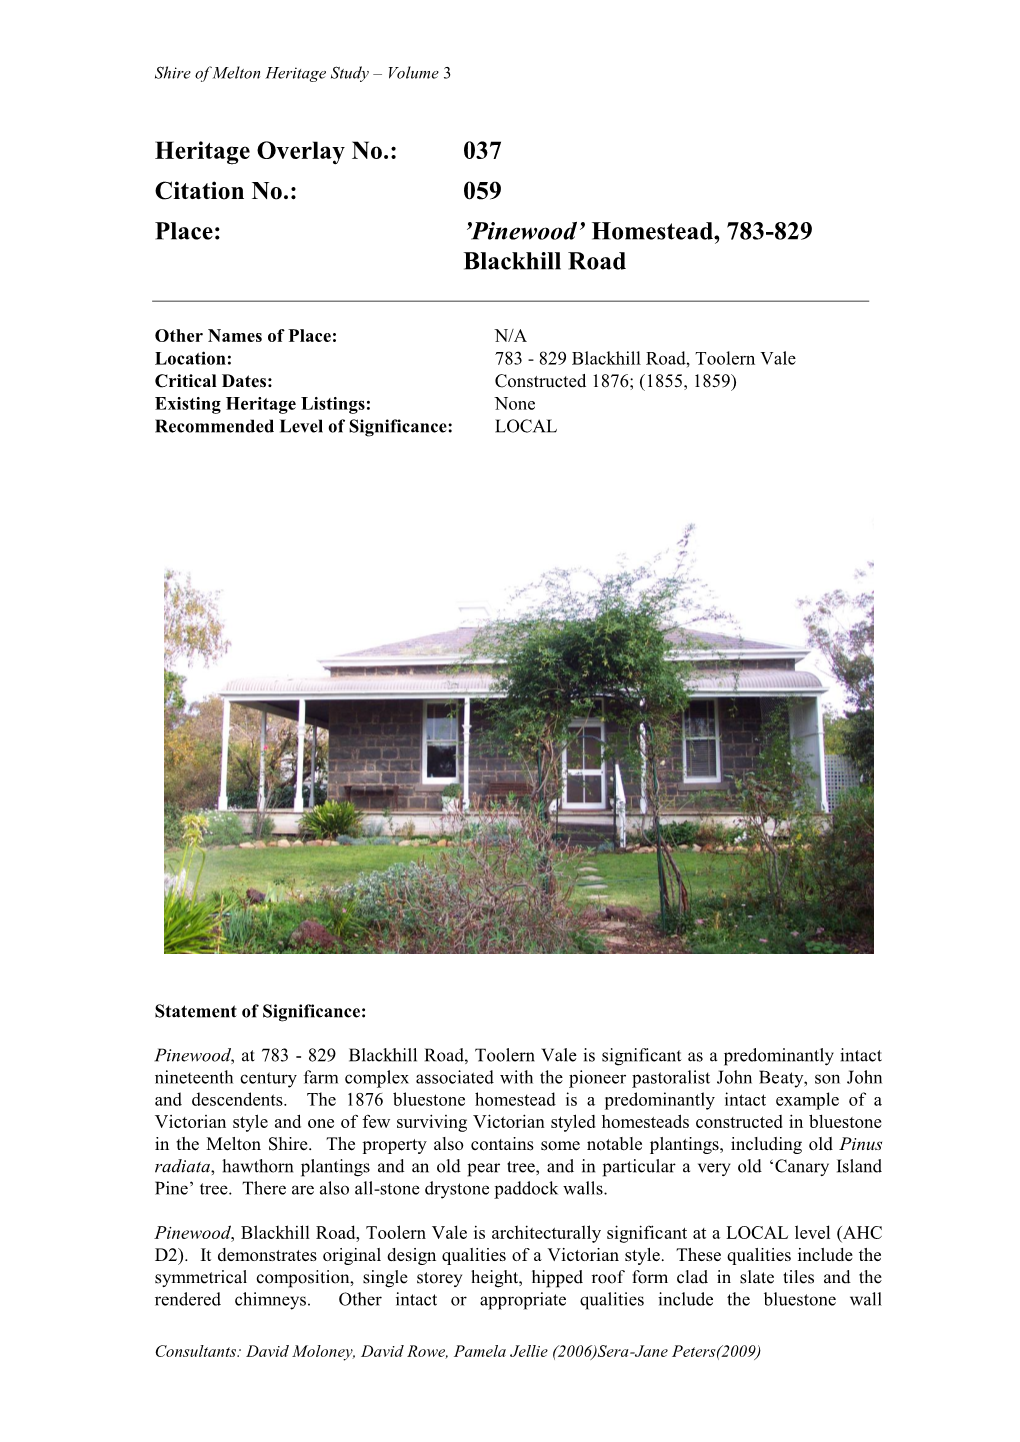 059 Place: 'Pinewood' Homestead, 783-829 Blackhill Road